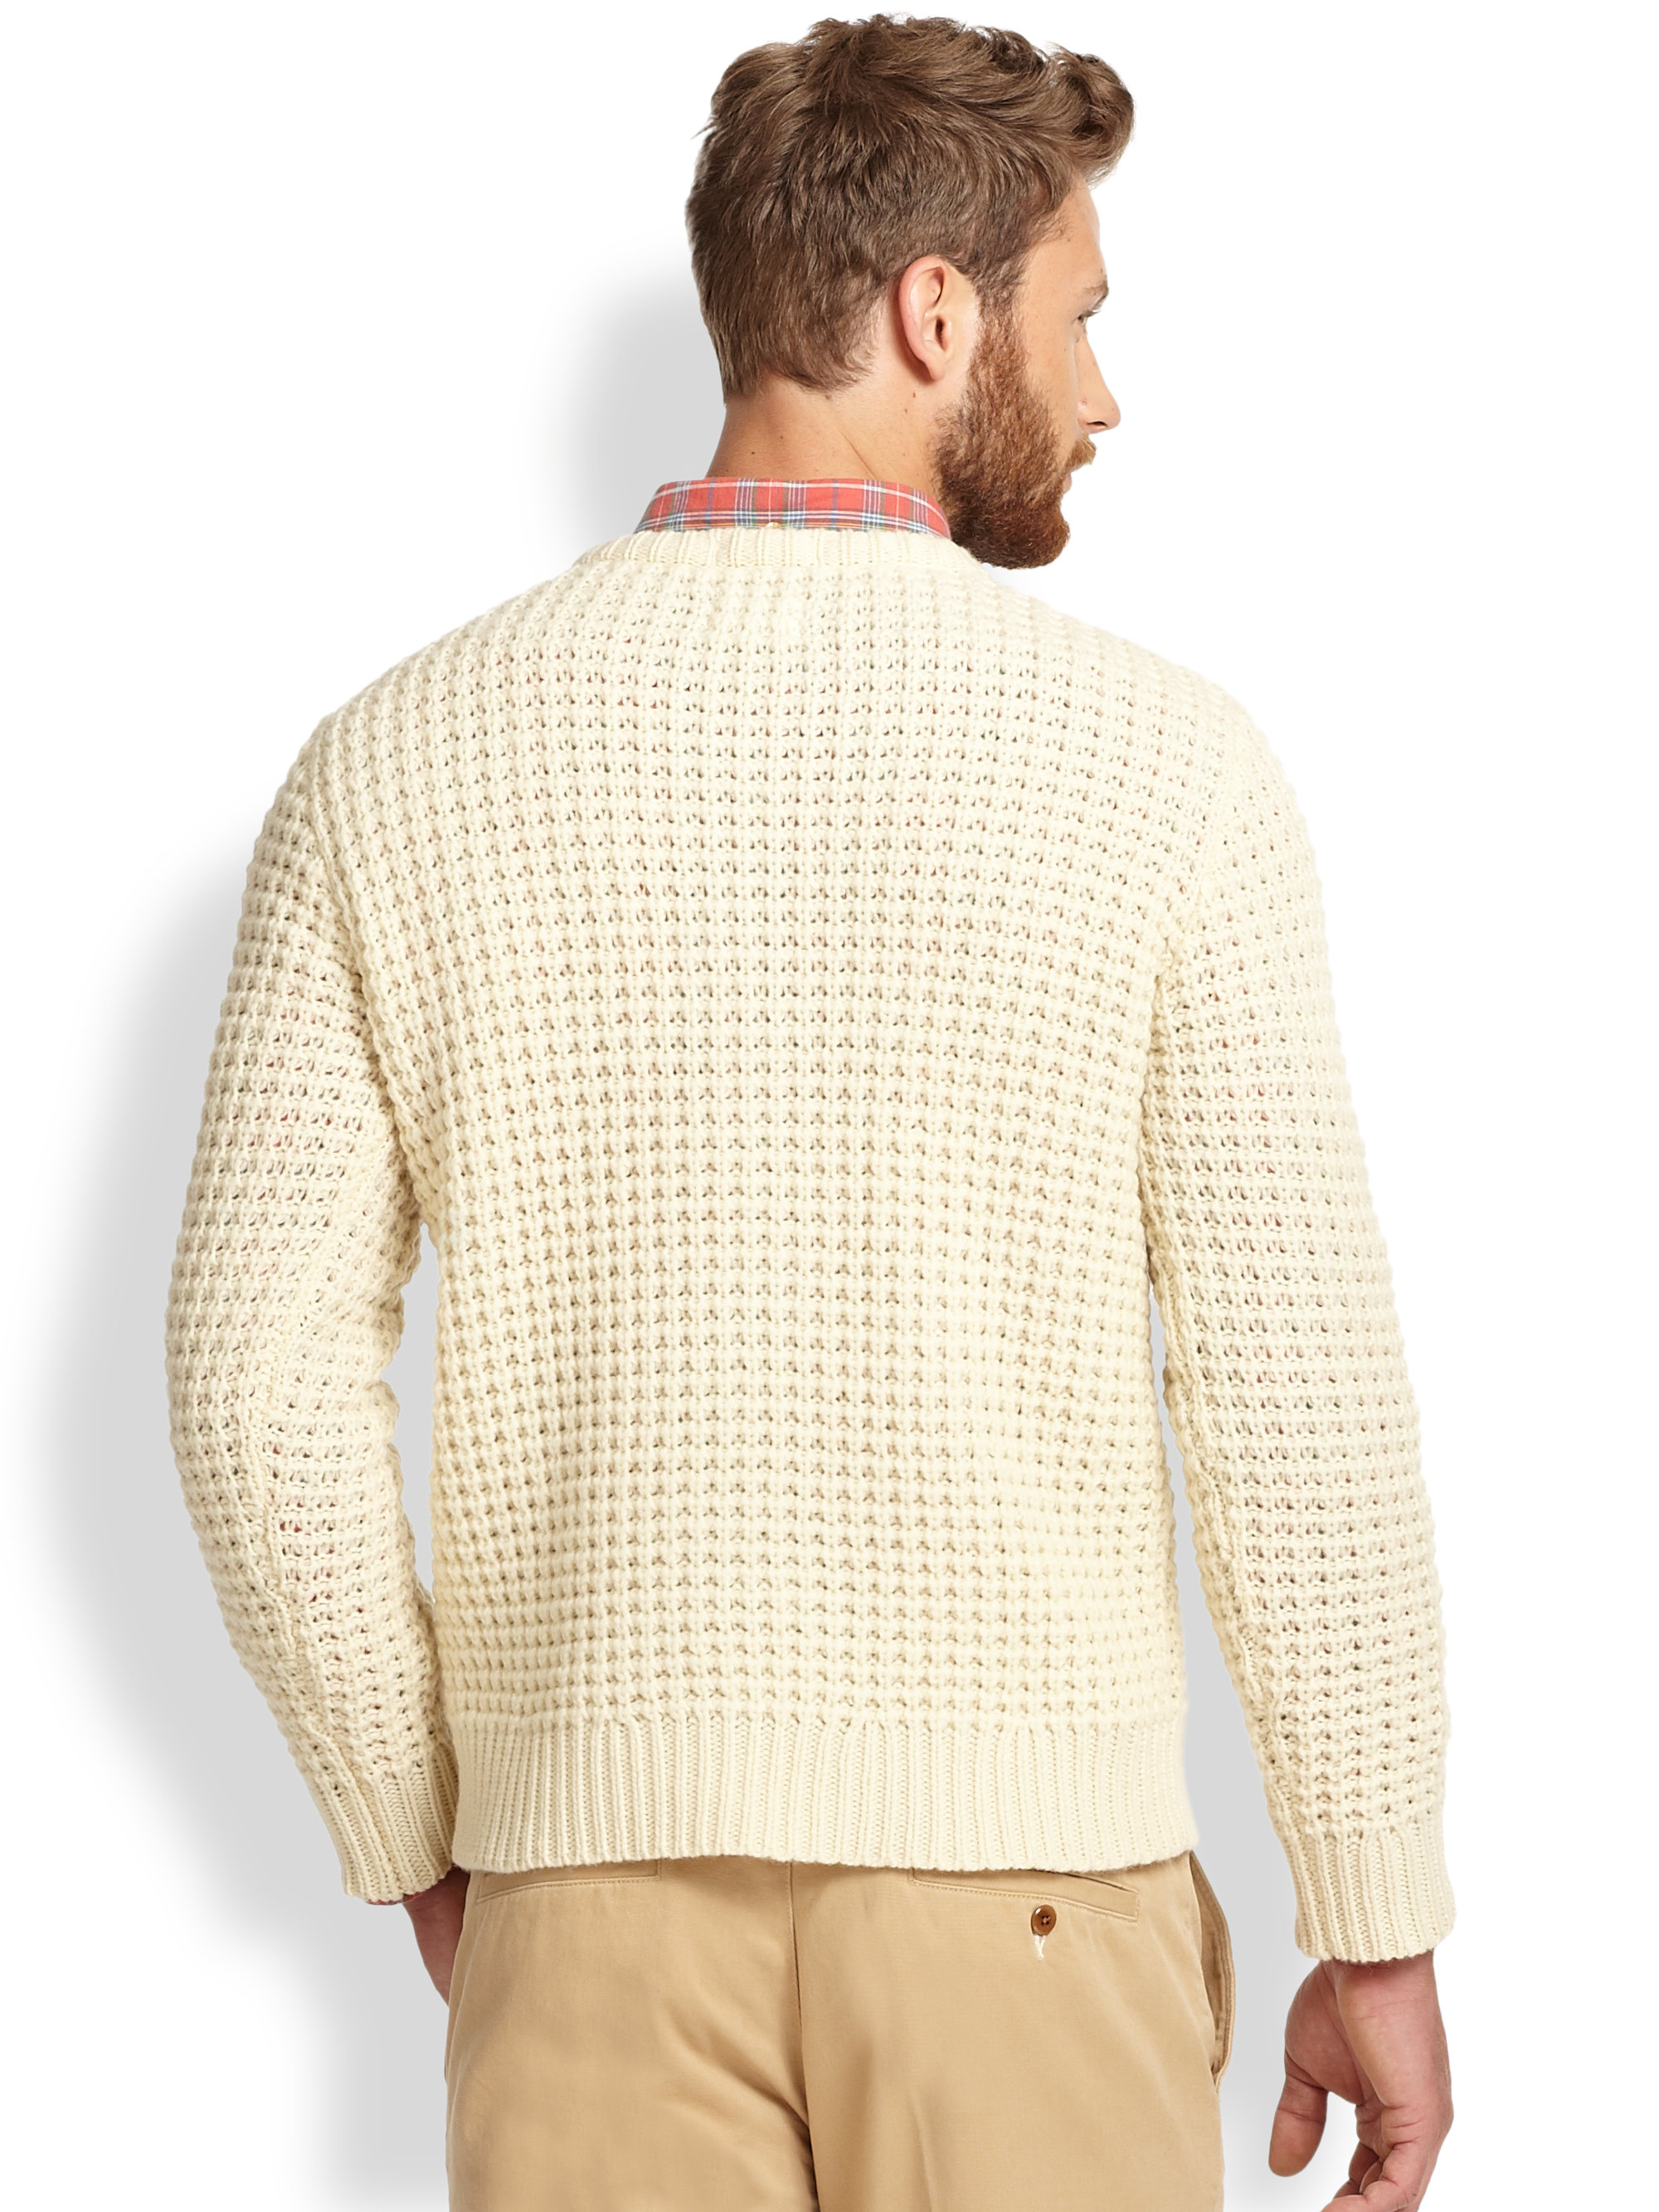 Lyst - Gant rugger Lambswool Cable Knit Sweater in White for Men